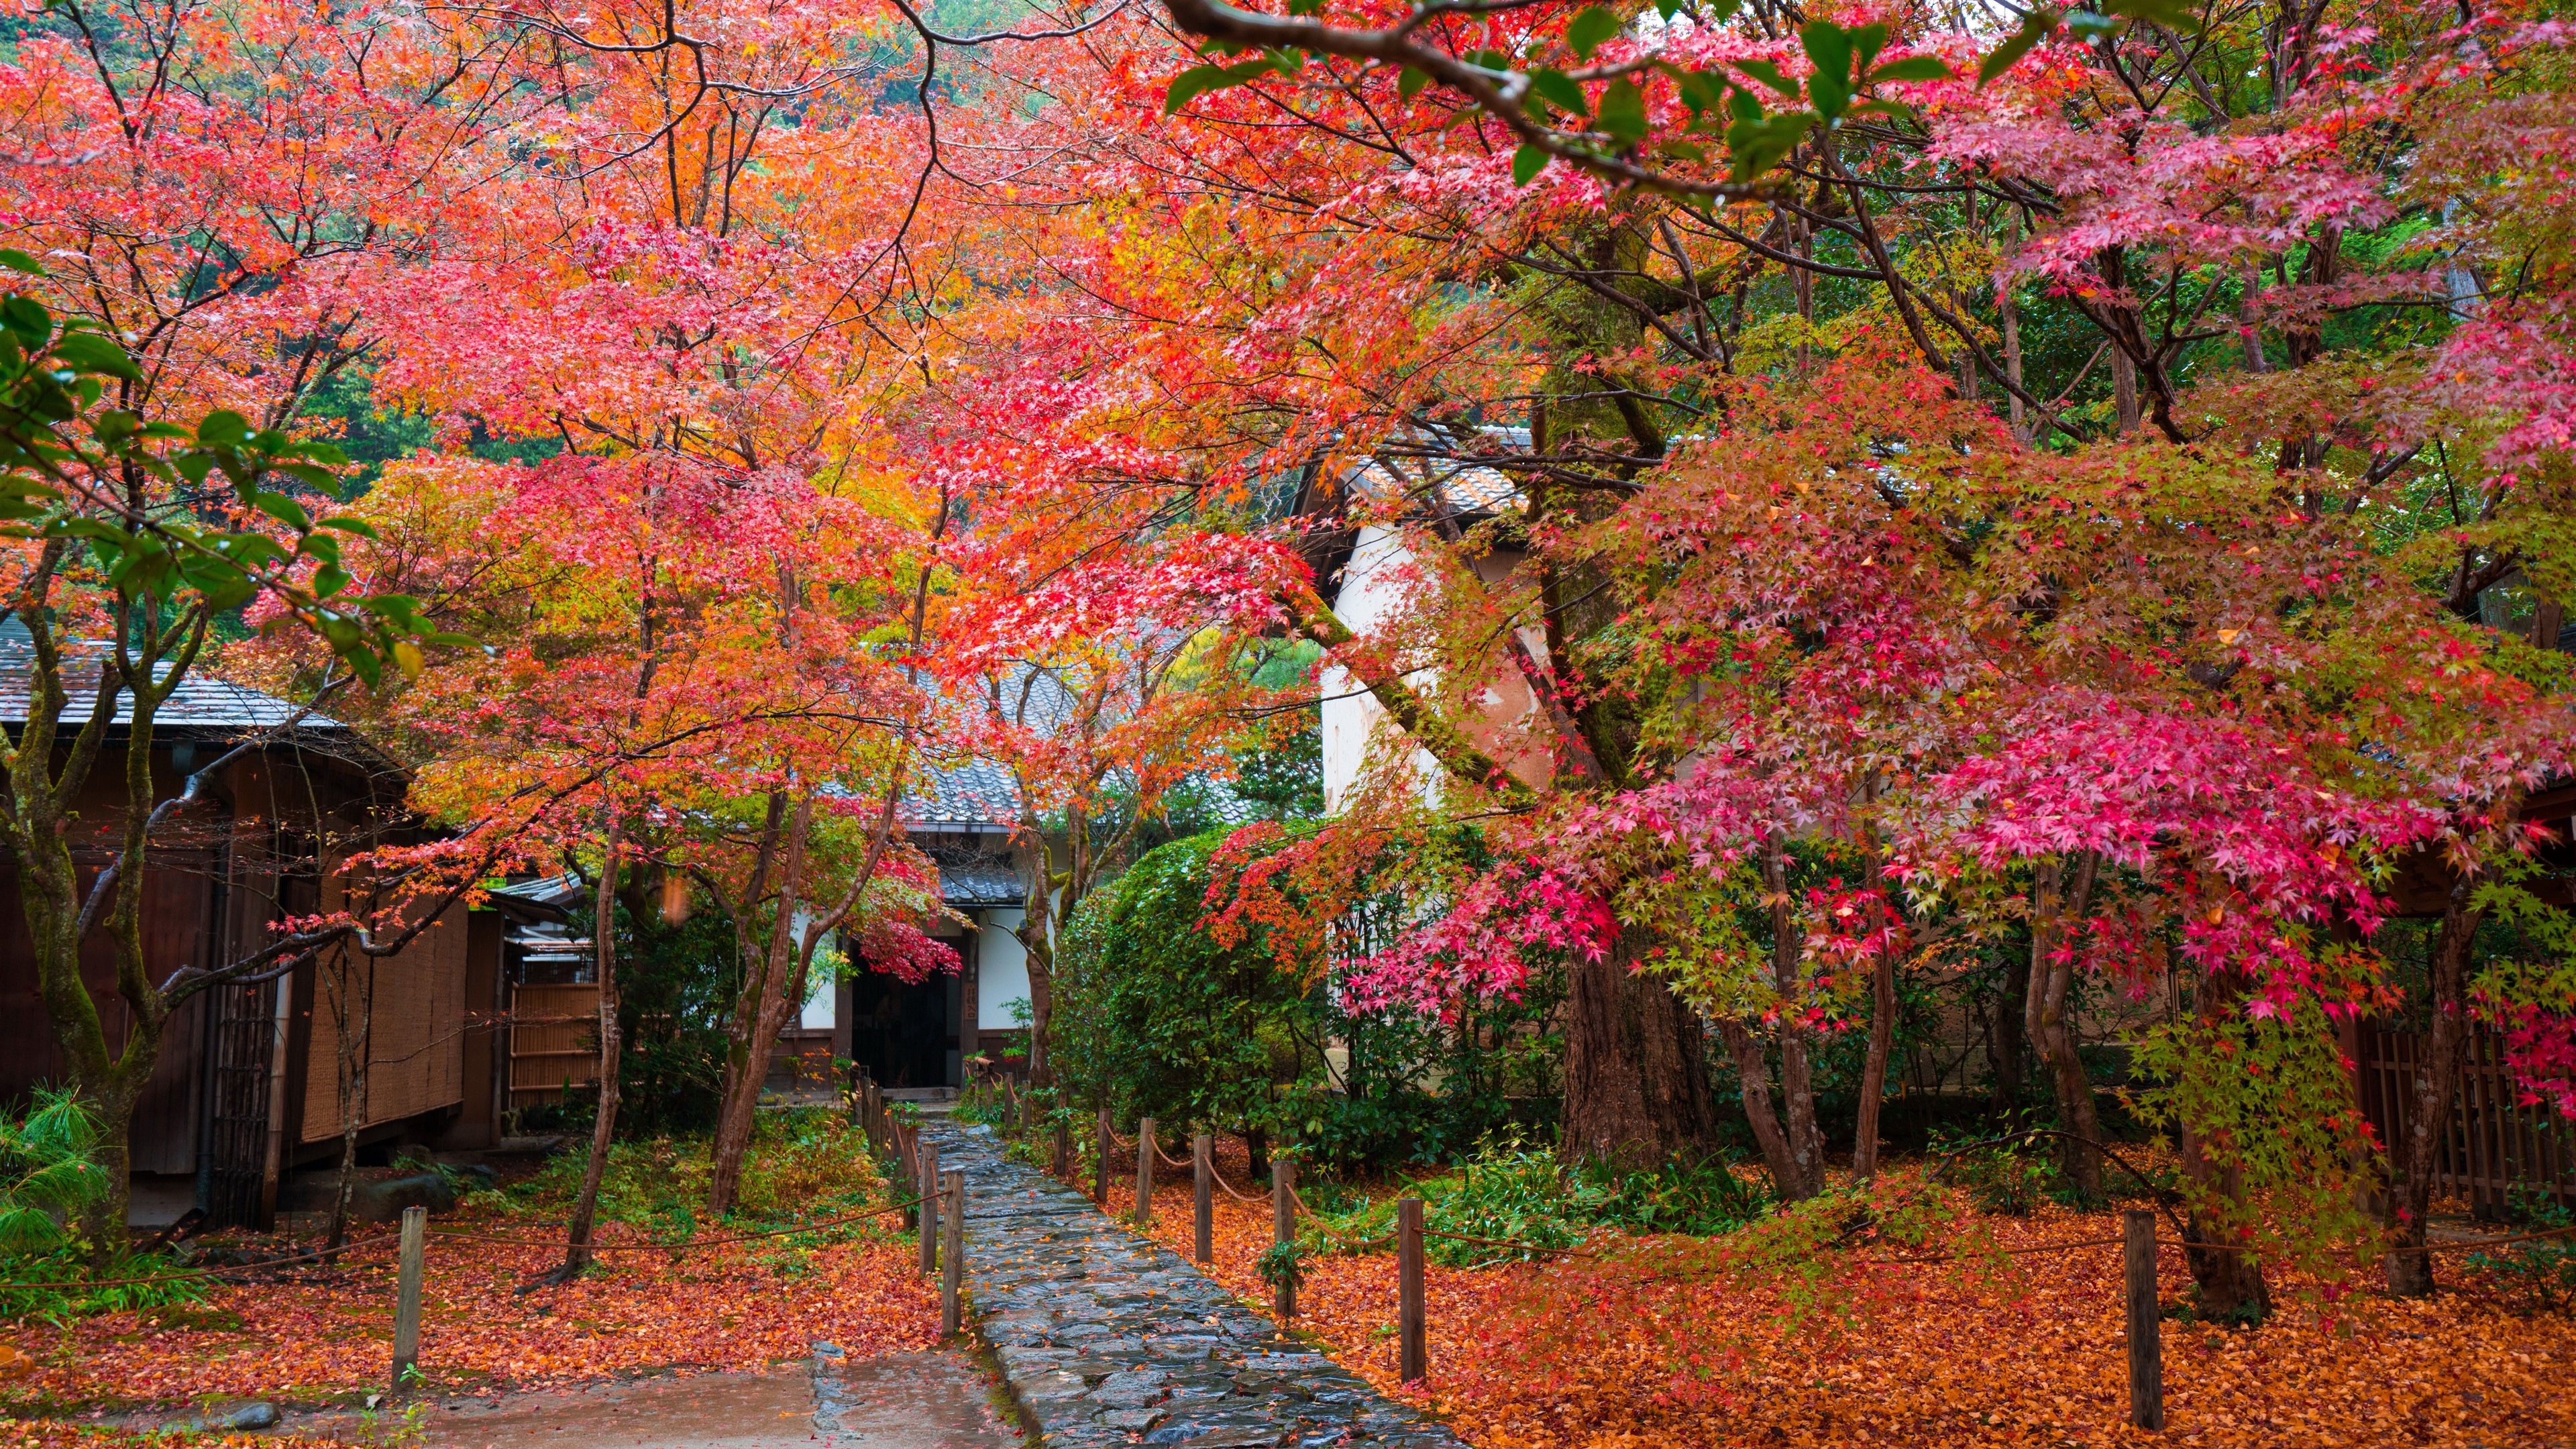 Wallpaper Japan, trees, red maple leaves, autumn, house, garden 5120x2880 UHD 5K Picture, Image